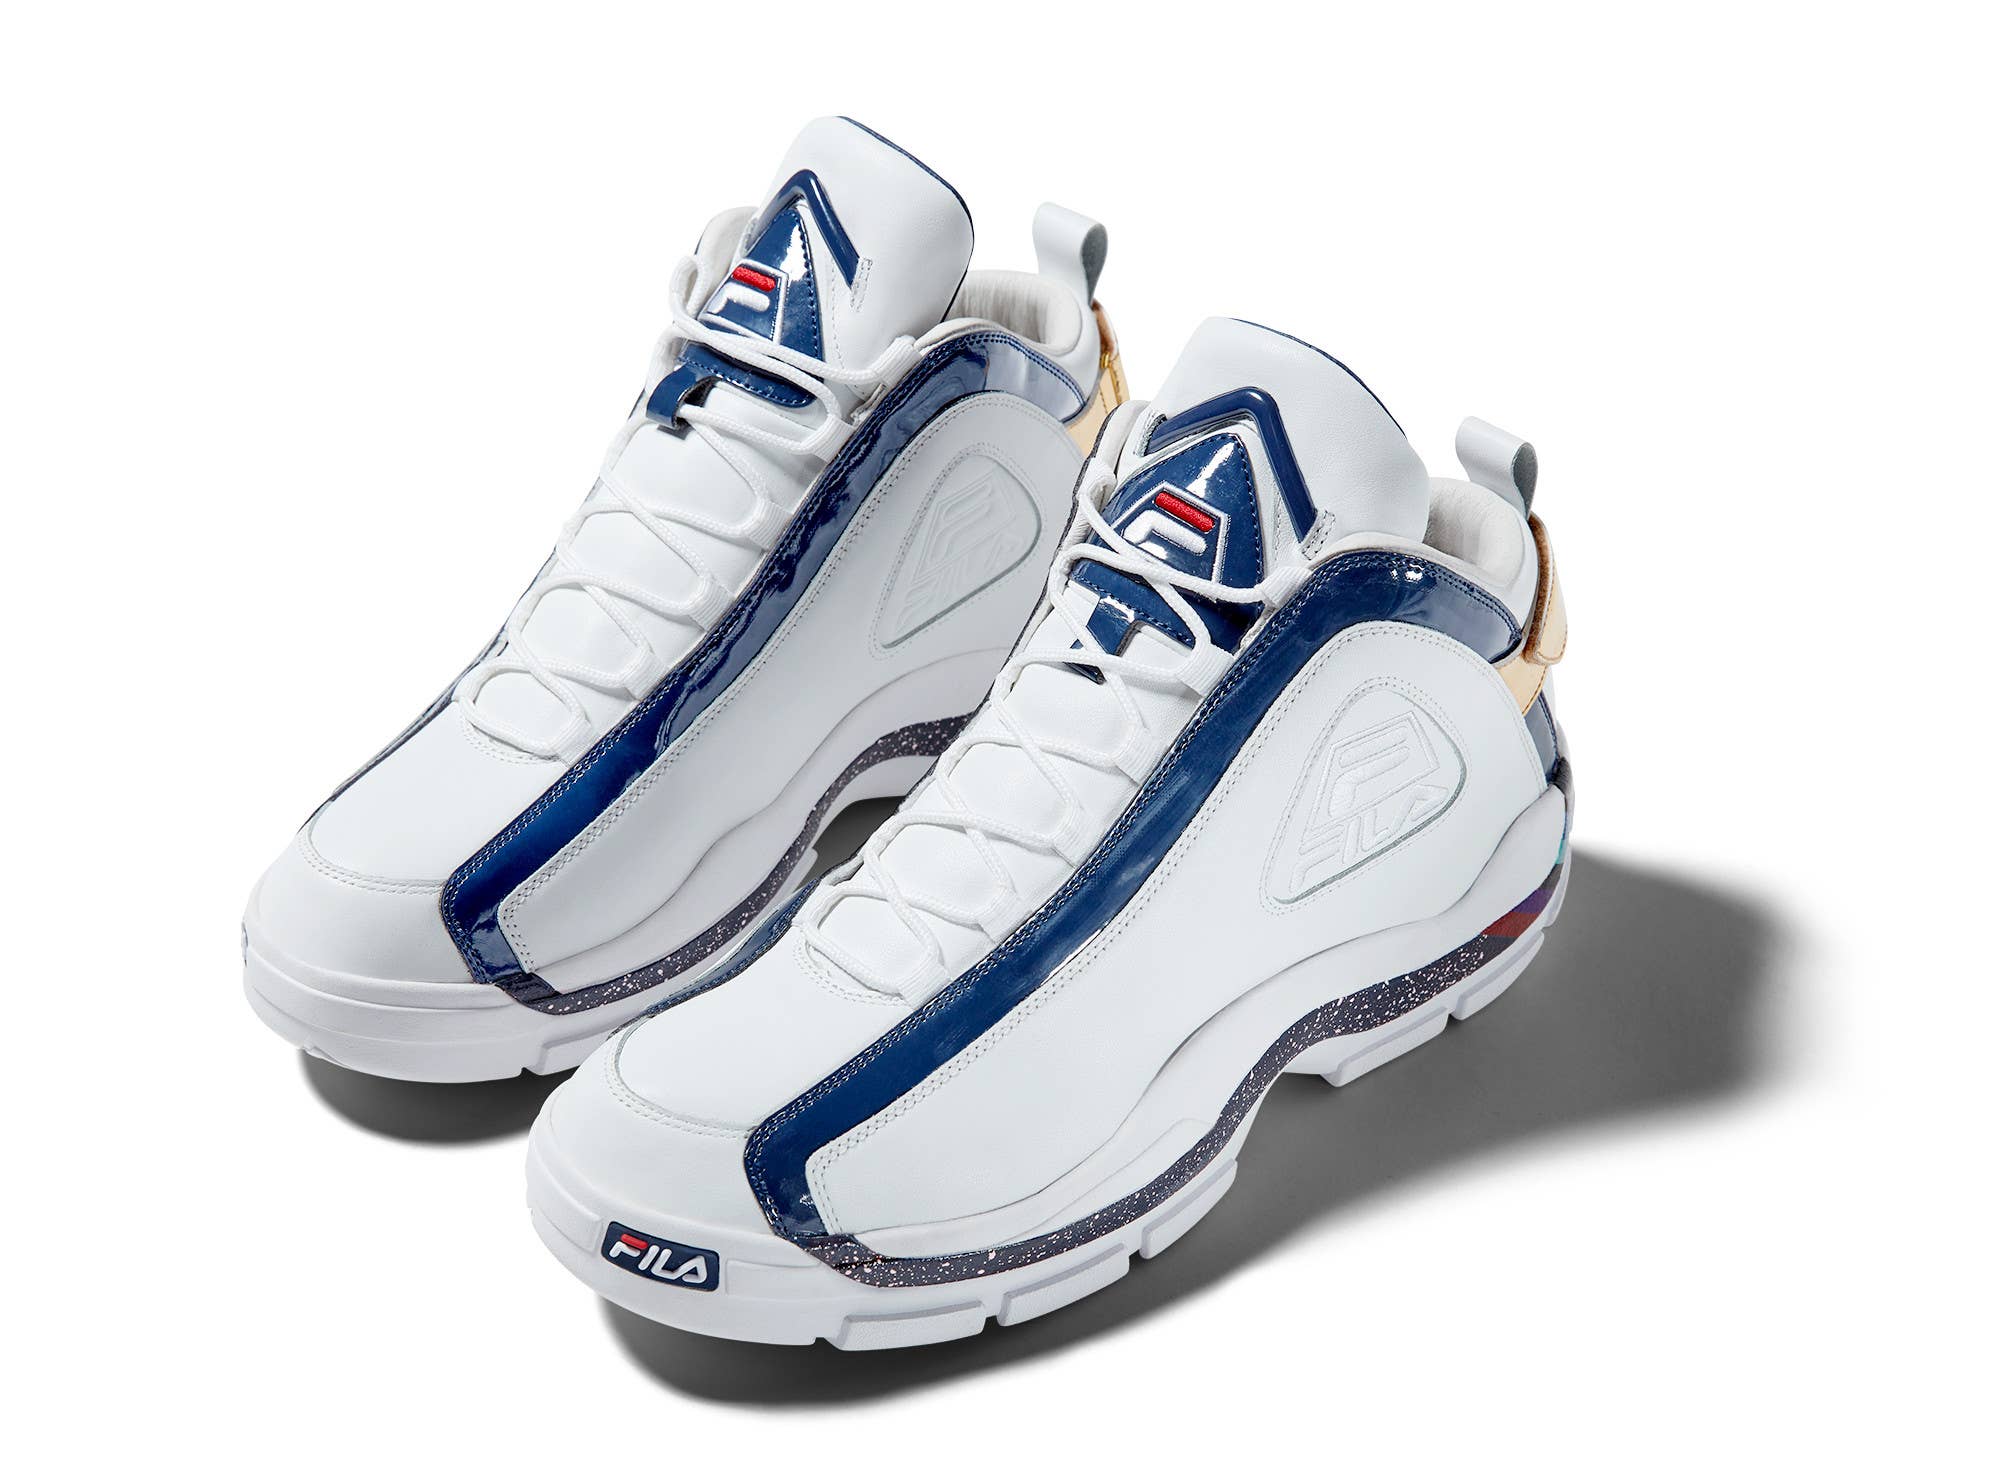 Fila Grant Hill 2 Hall of Fame 'White' (Pair)